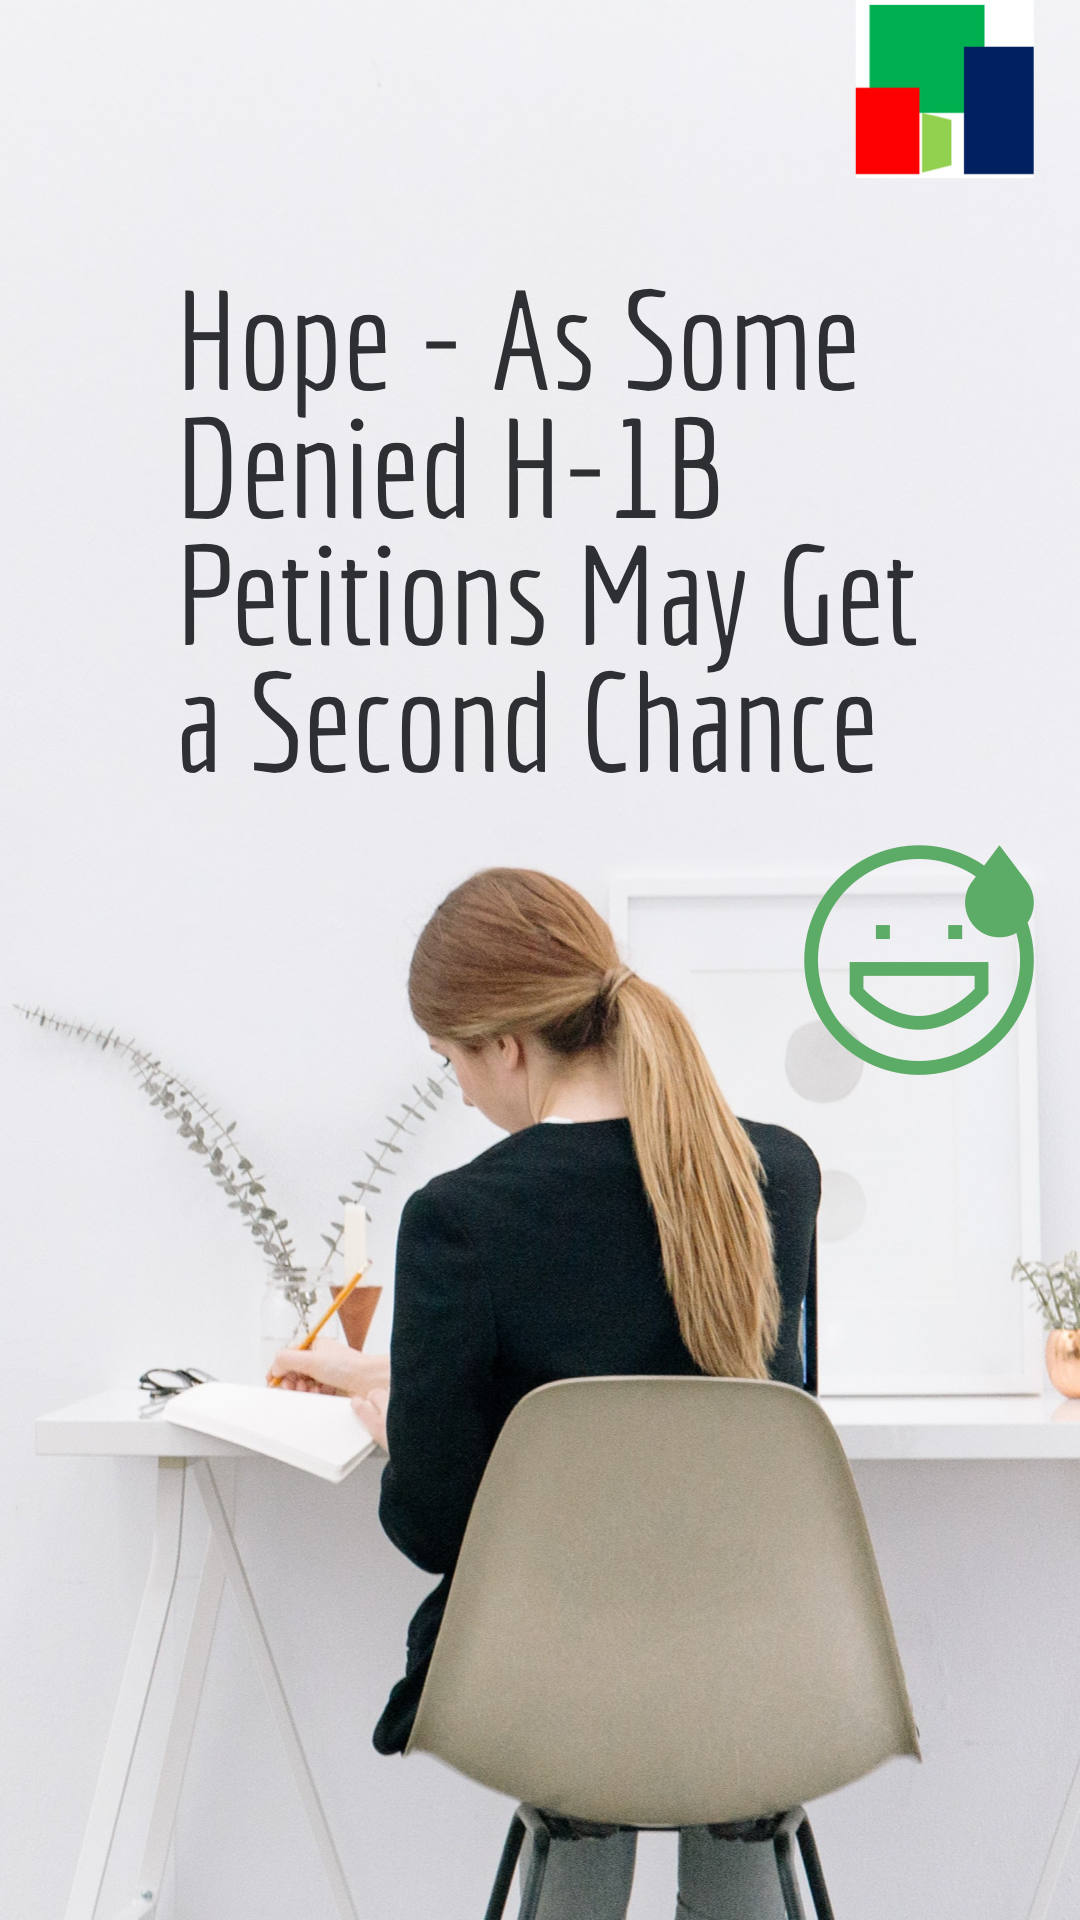 Hope – As Some Denied H-1B petitions May Get a Second Chance